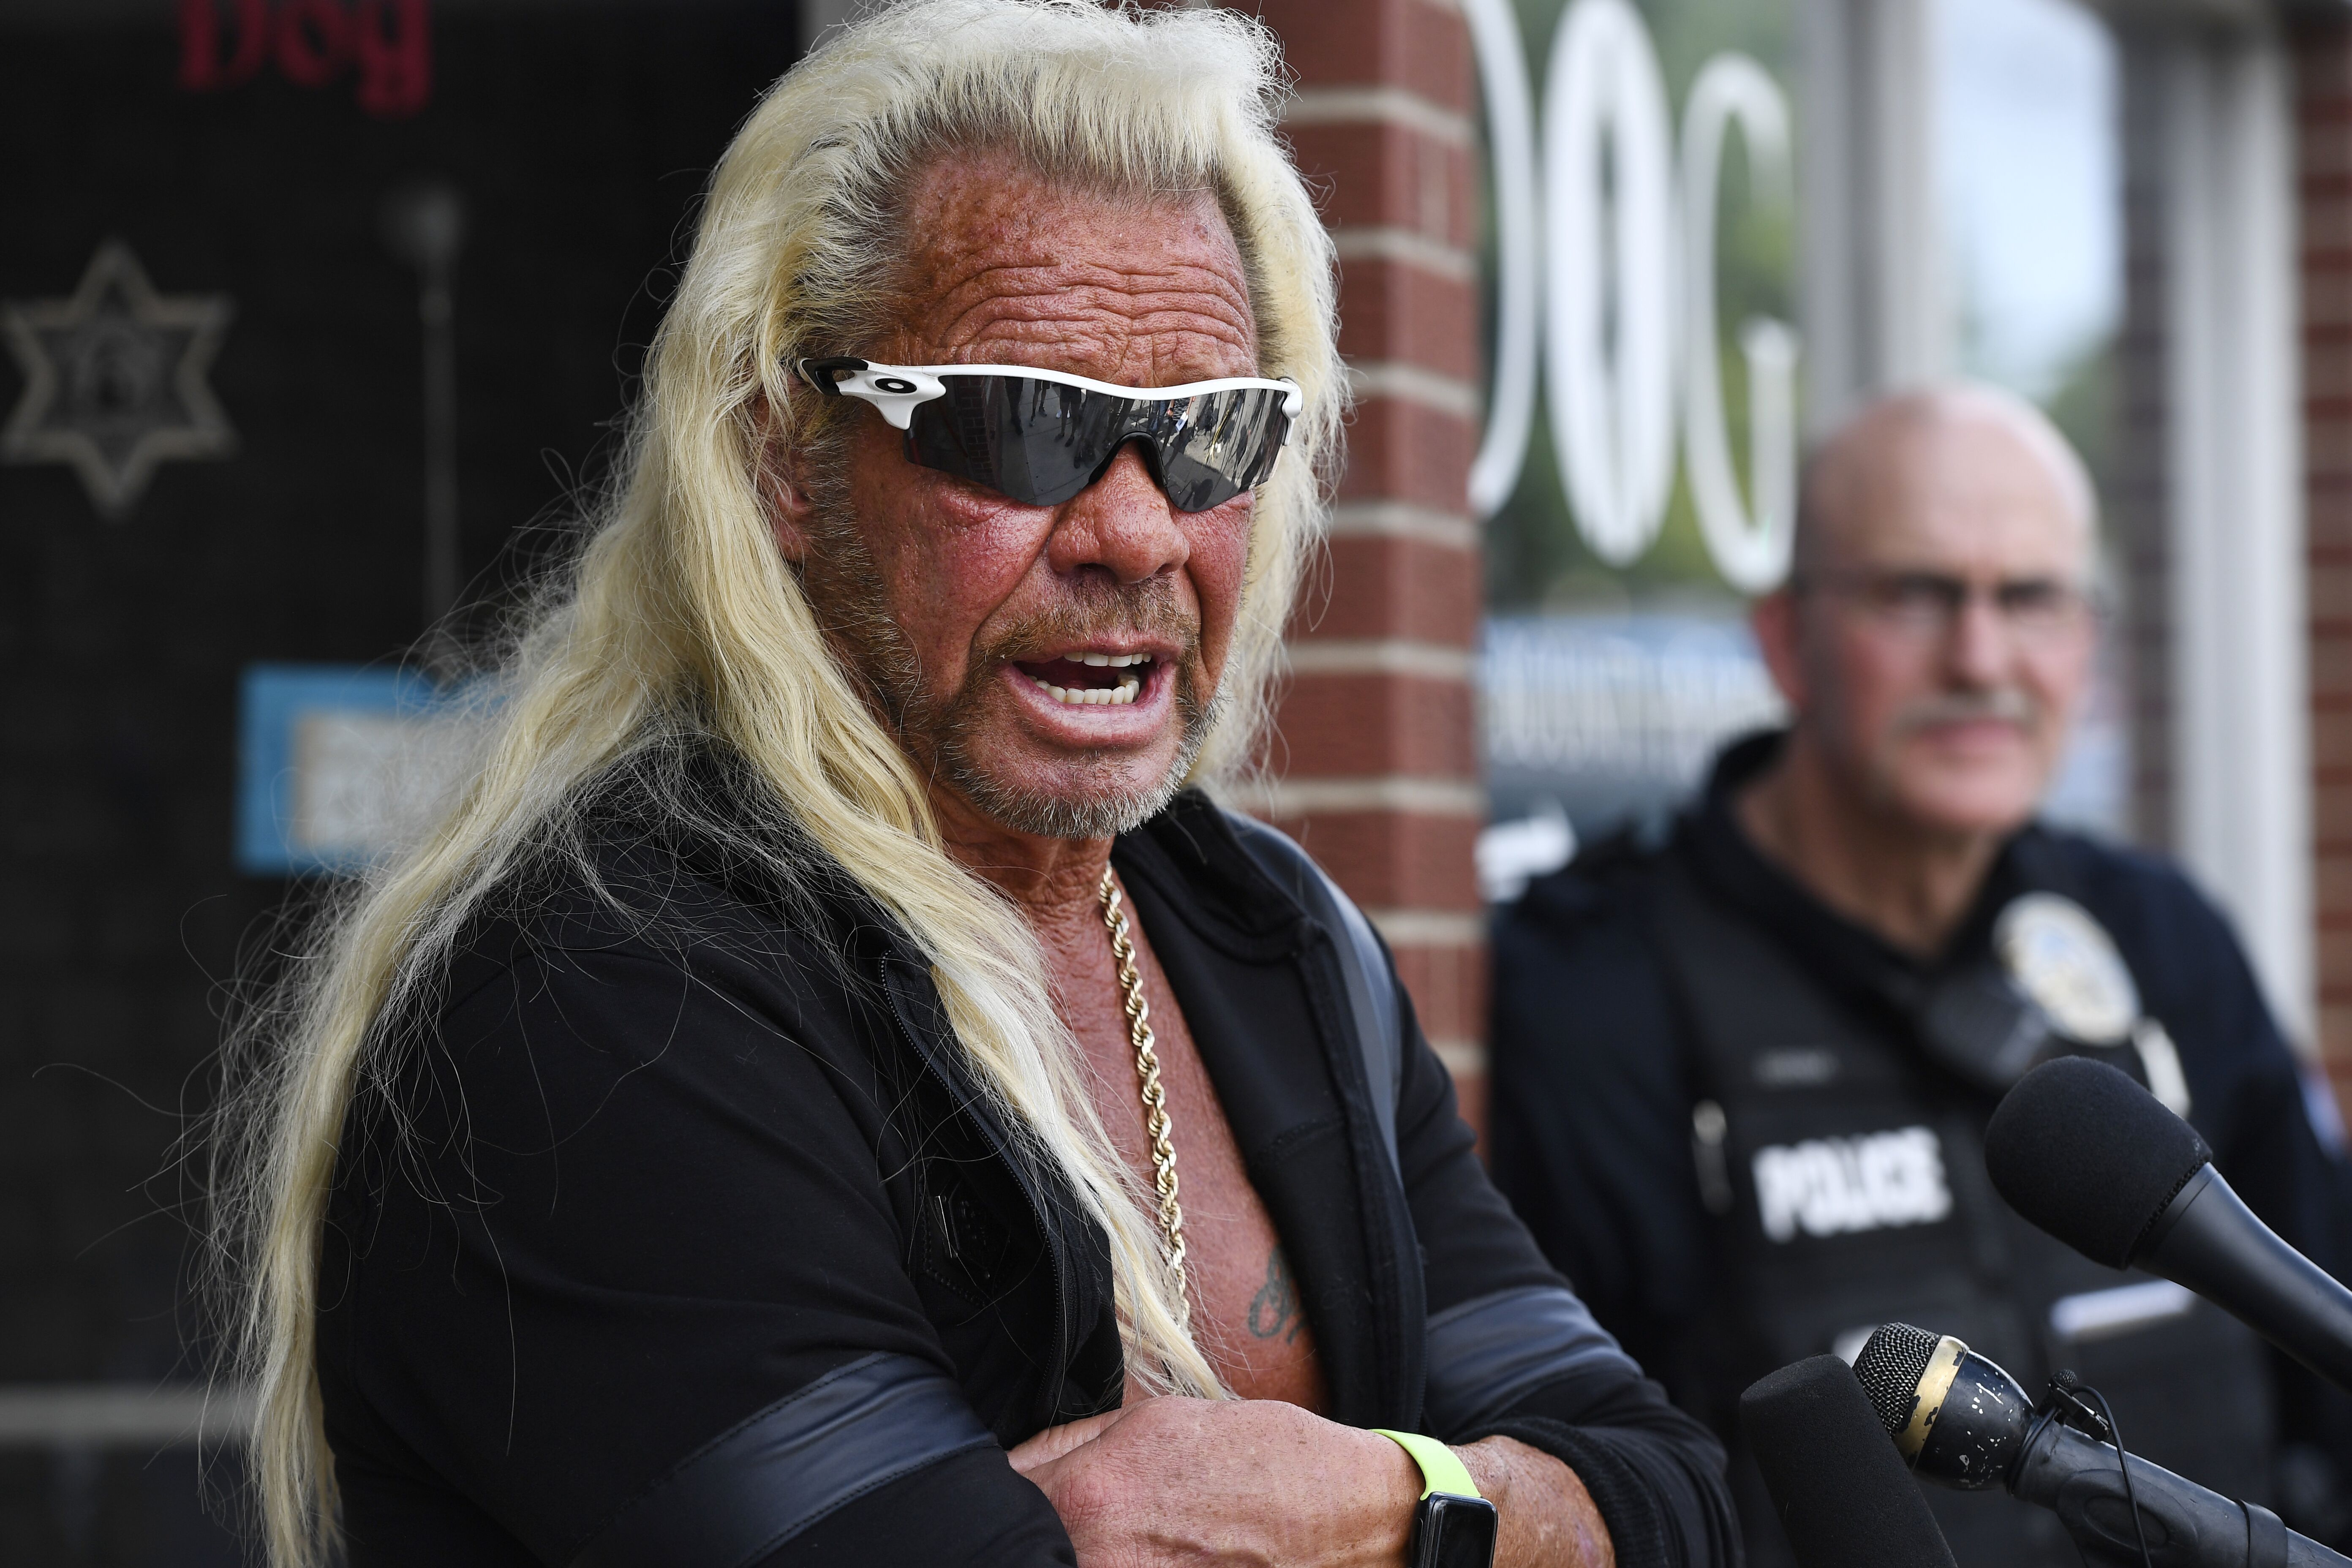 Duane "Dog The Bounty Hunter" Chapman during a press conference in front of his store August 02, 2019 | Photo: Getty Images